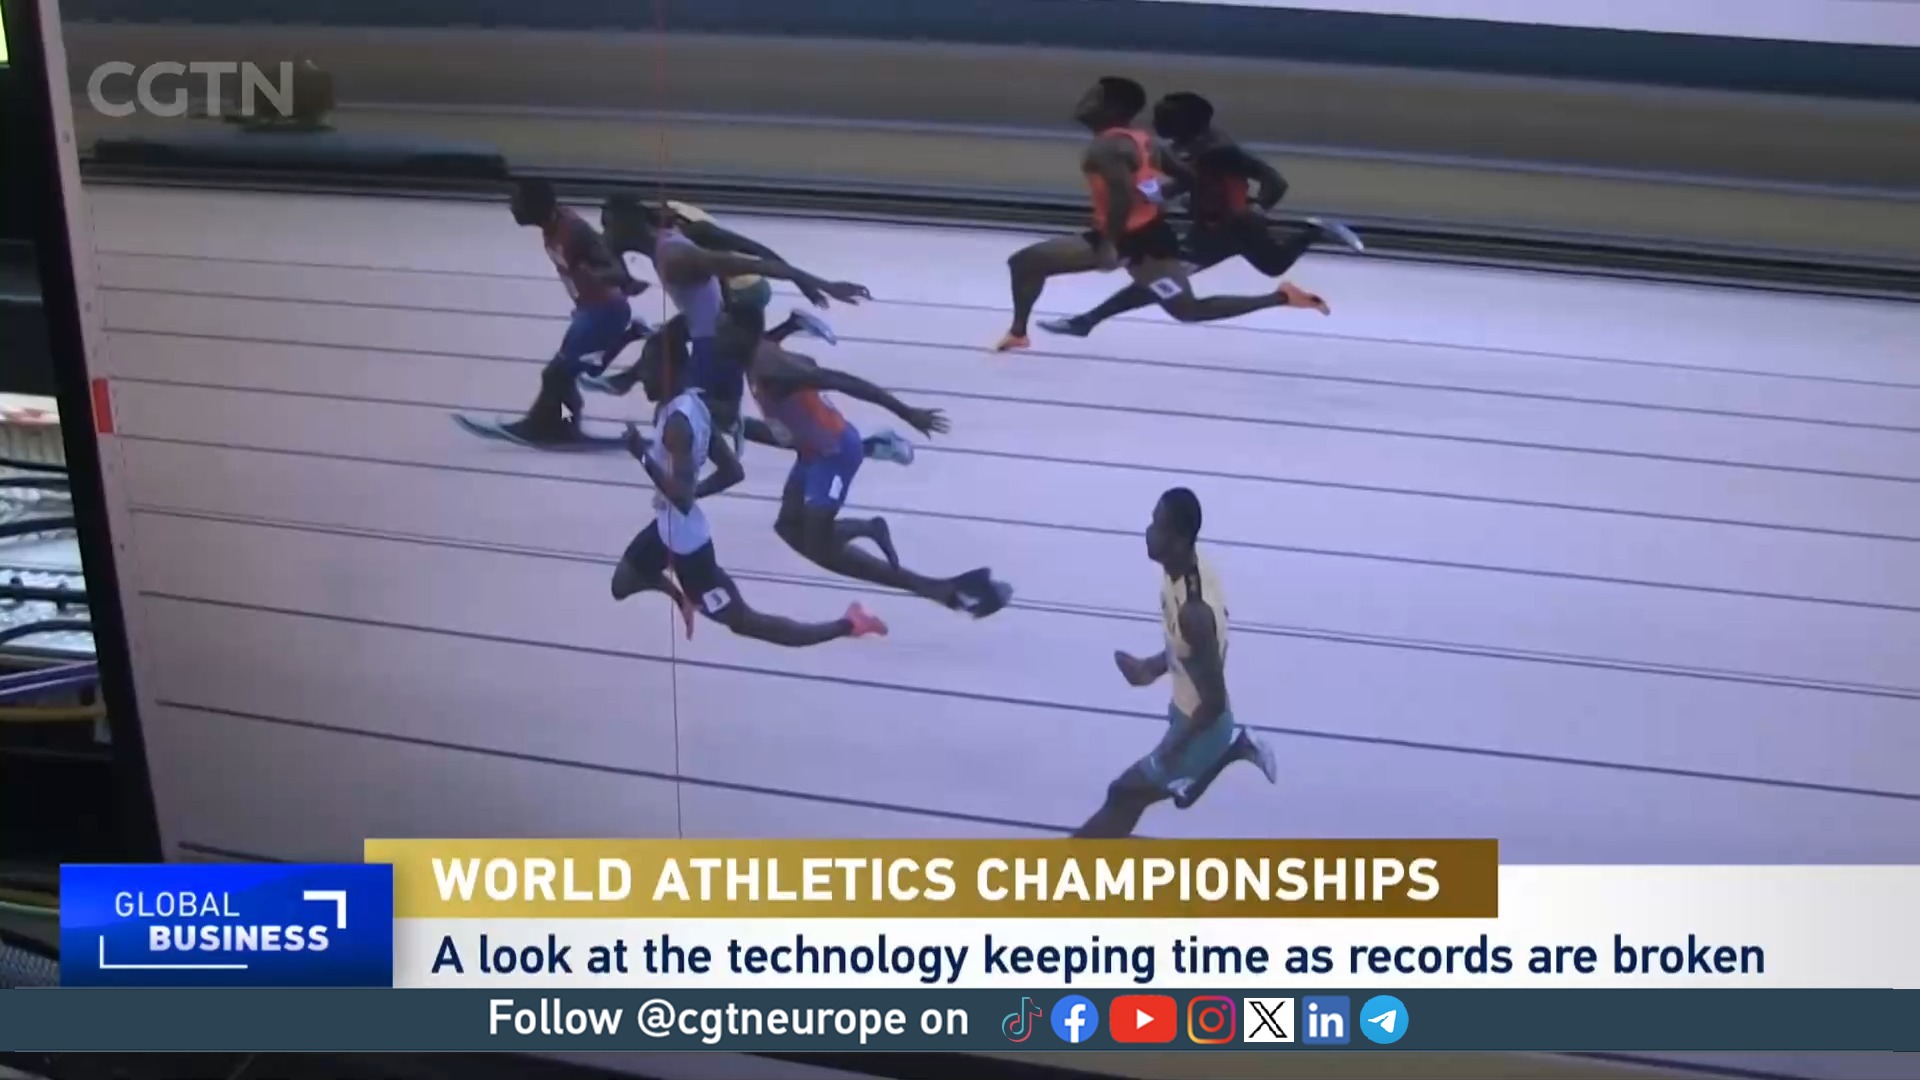 How technology is being used to keep up with the world’s best athletes